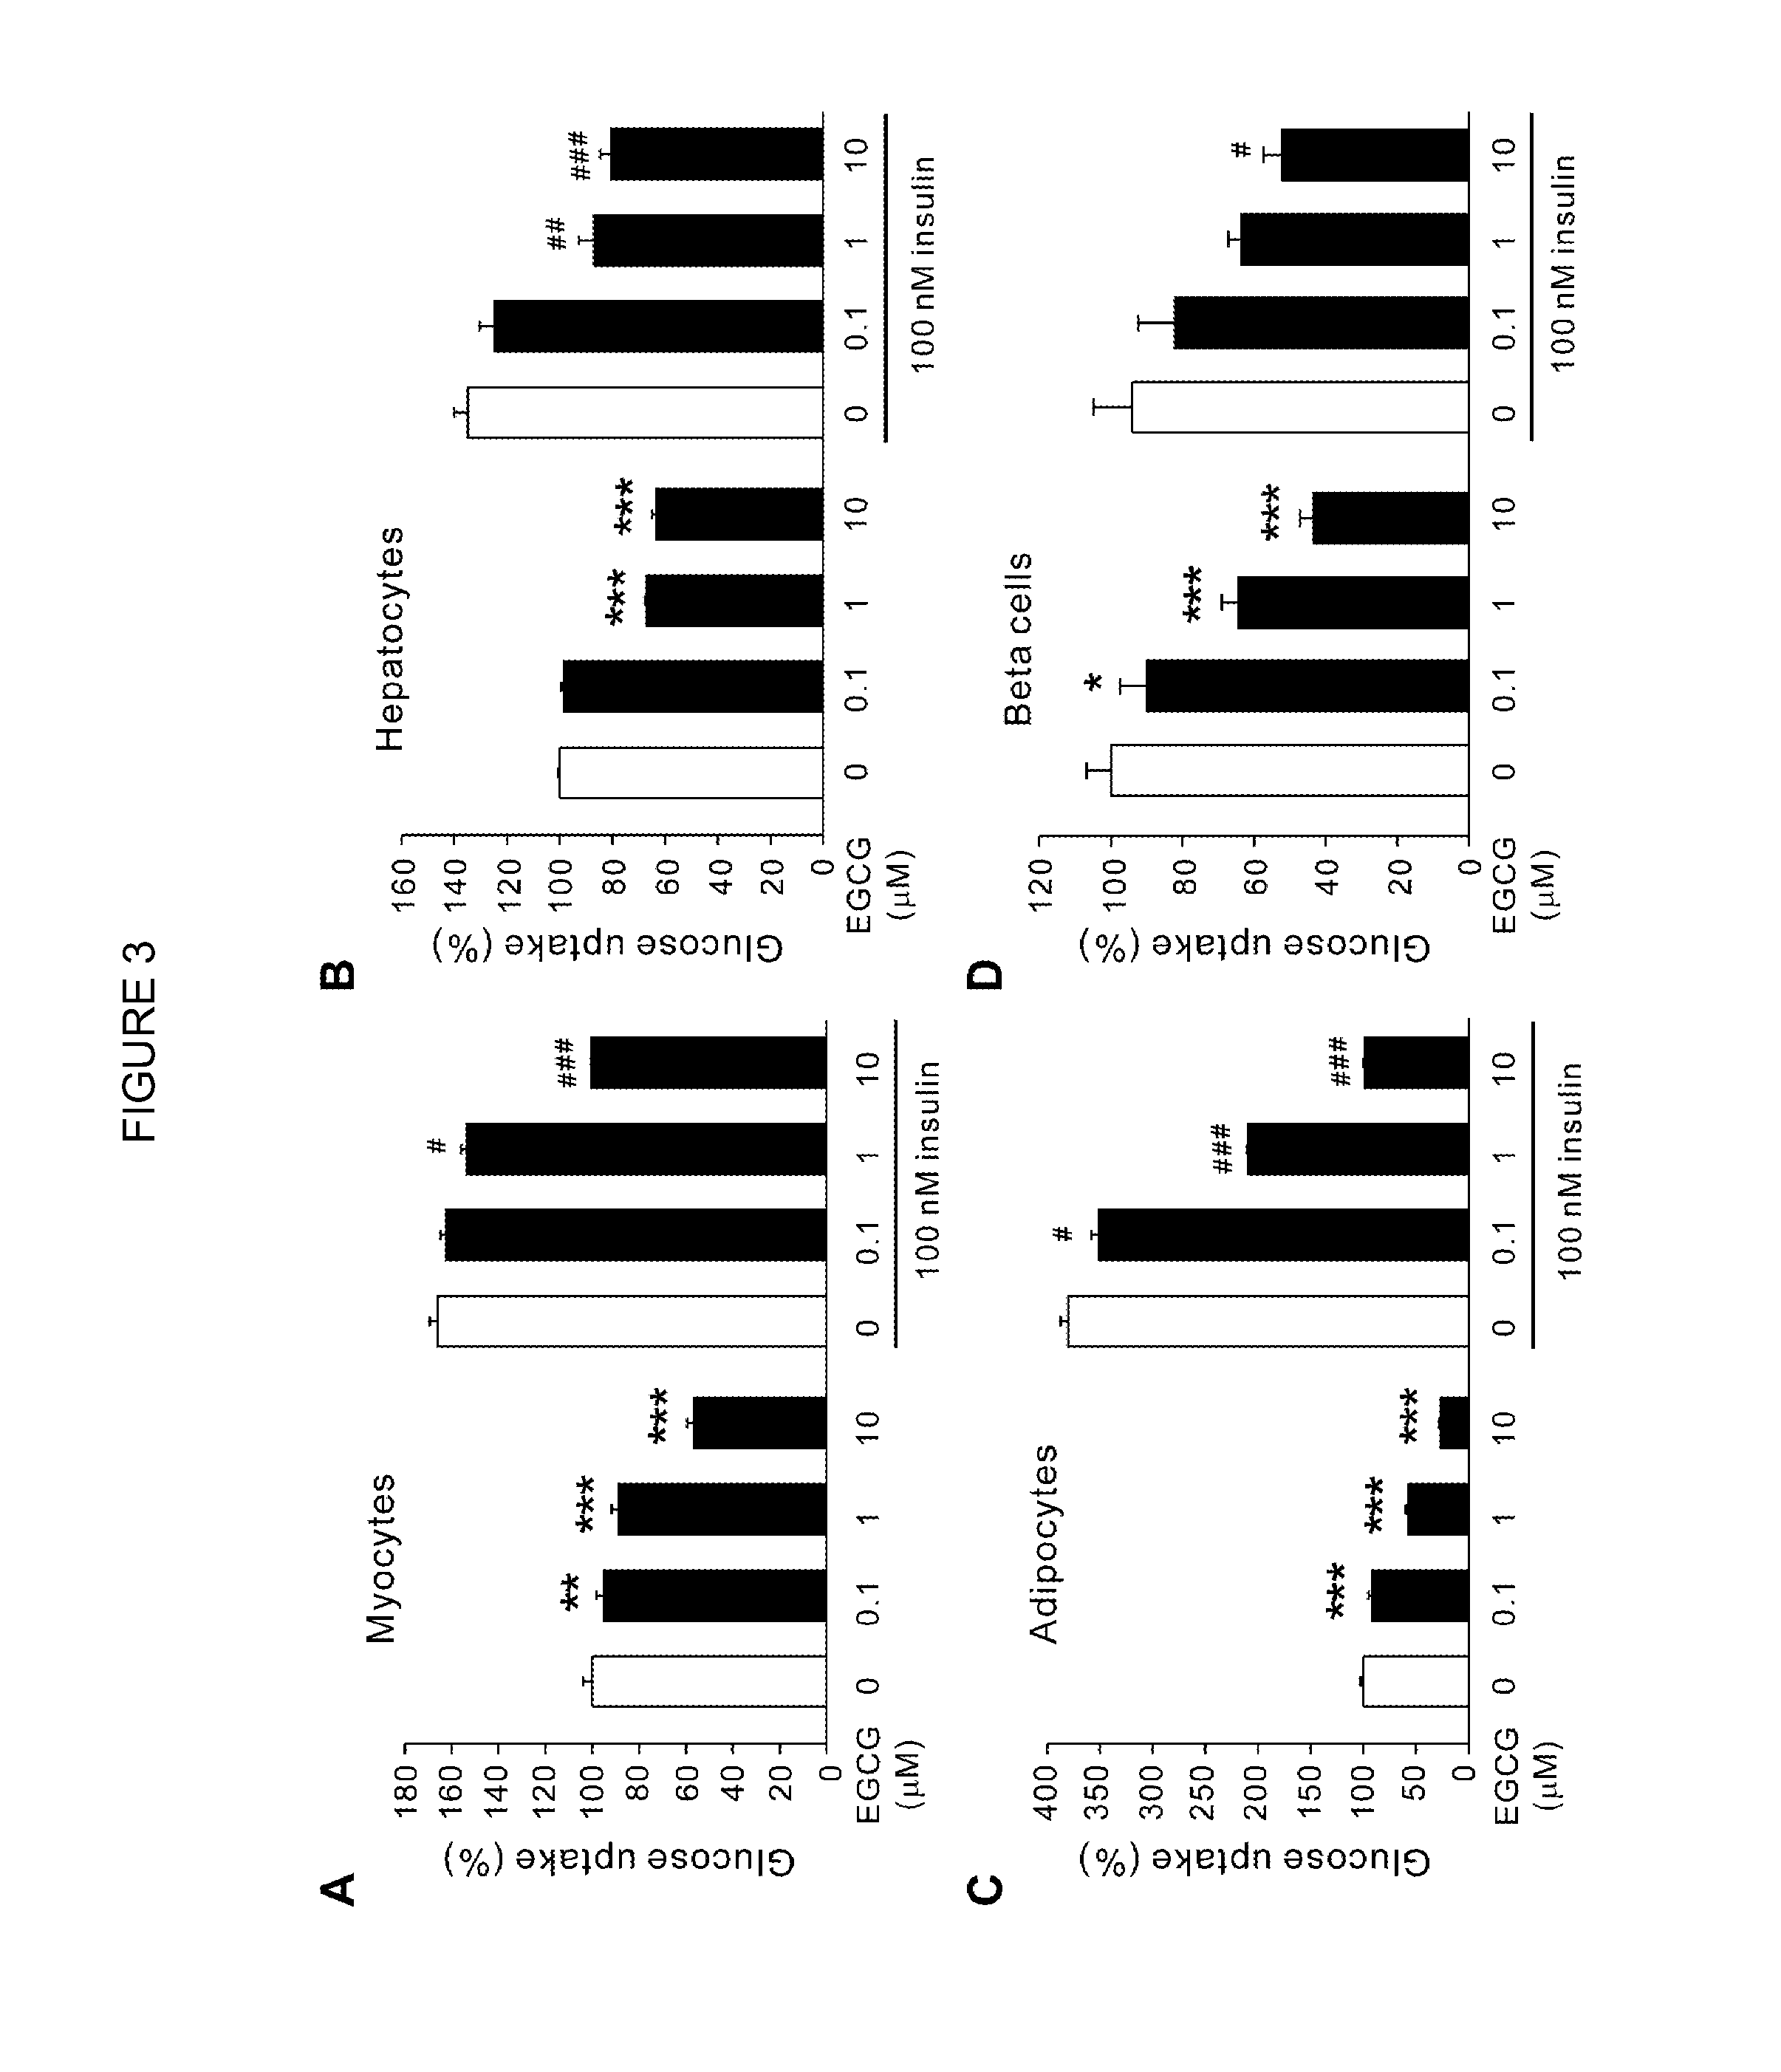 Composition for controlling increase in blood glucose